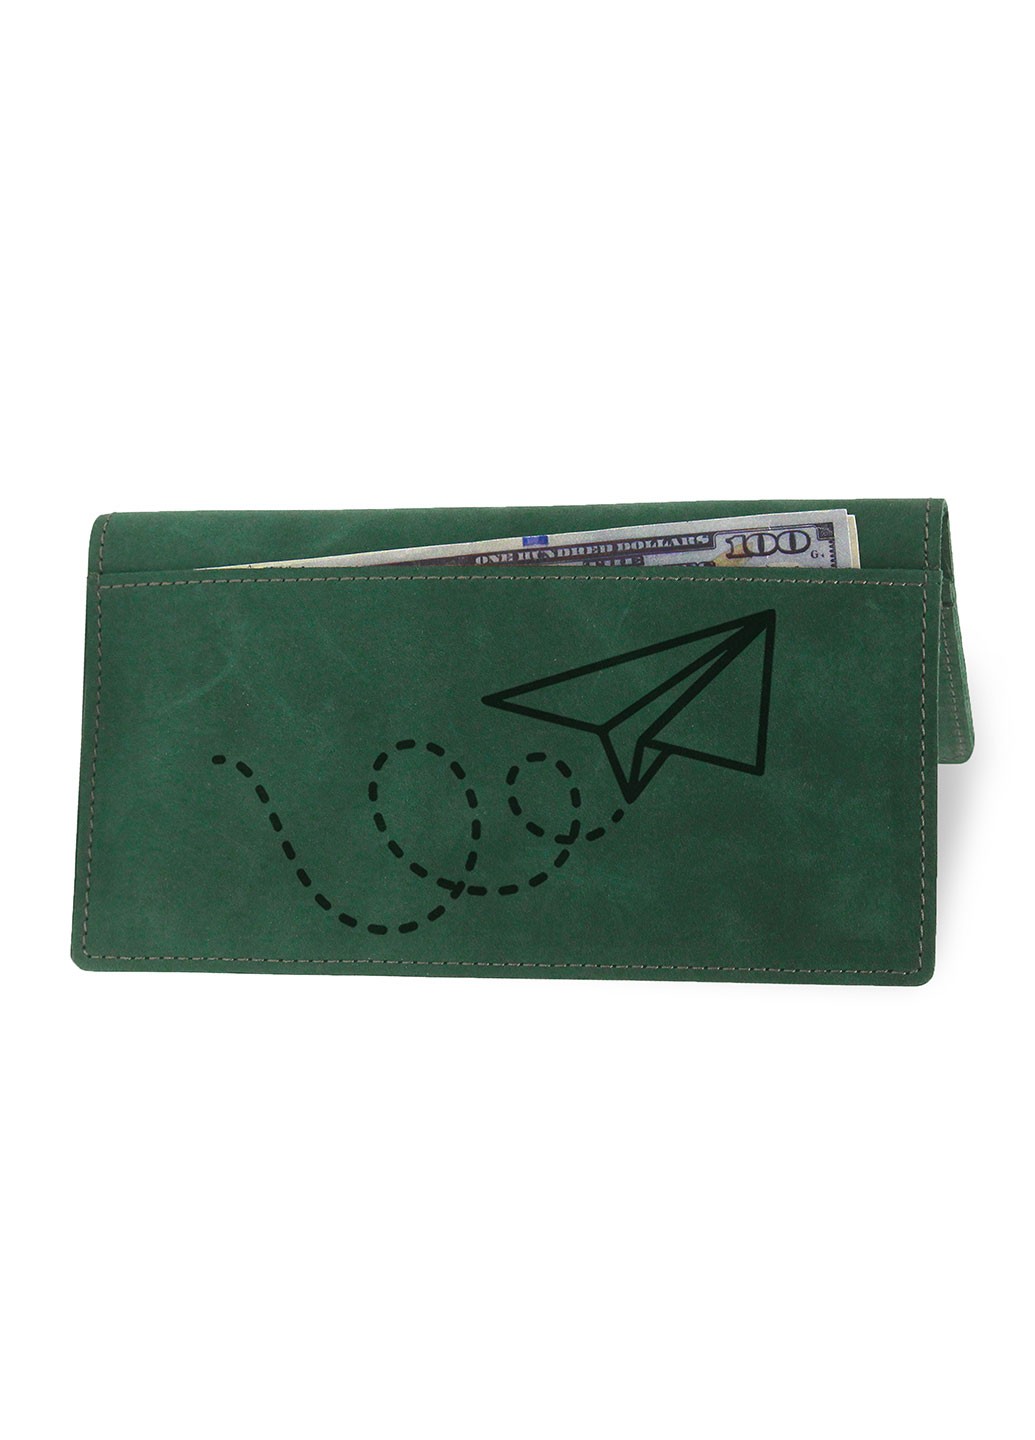 Leather wallet DNK Leather green B 30-13